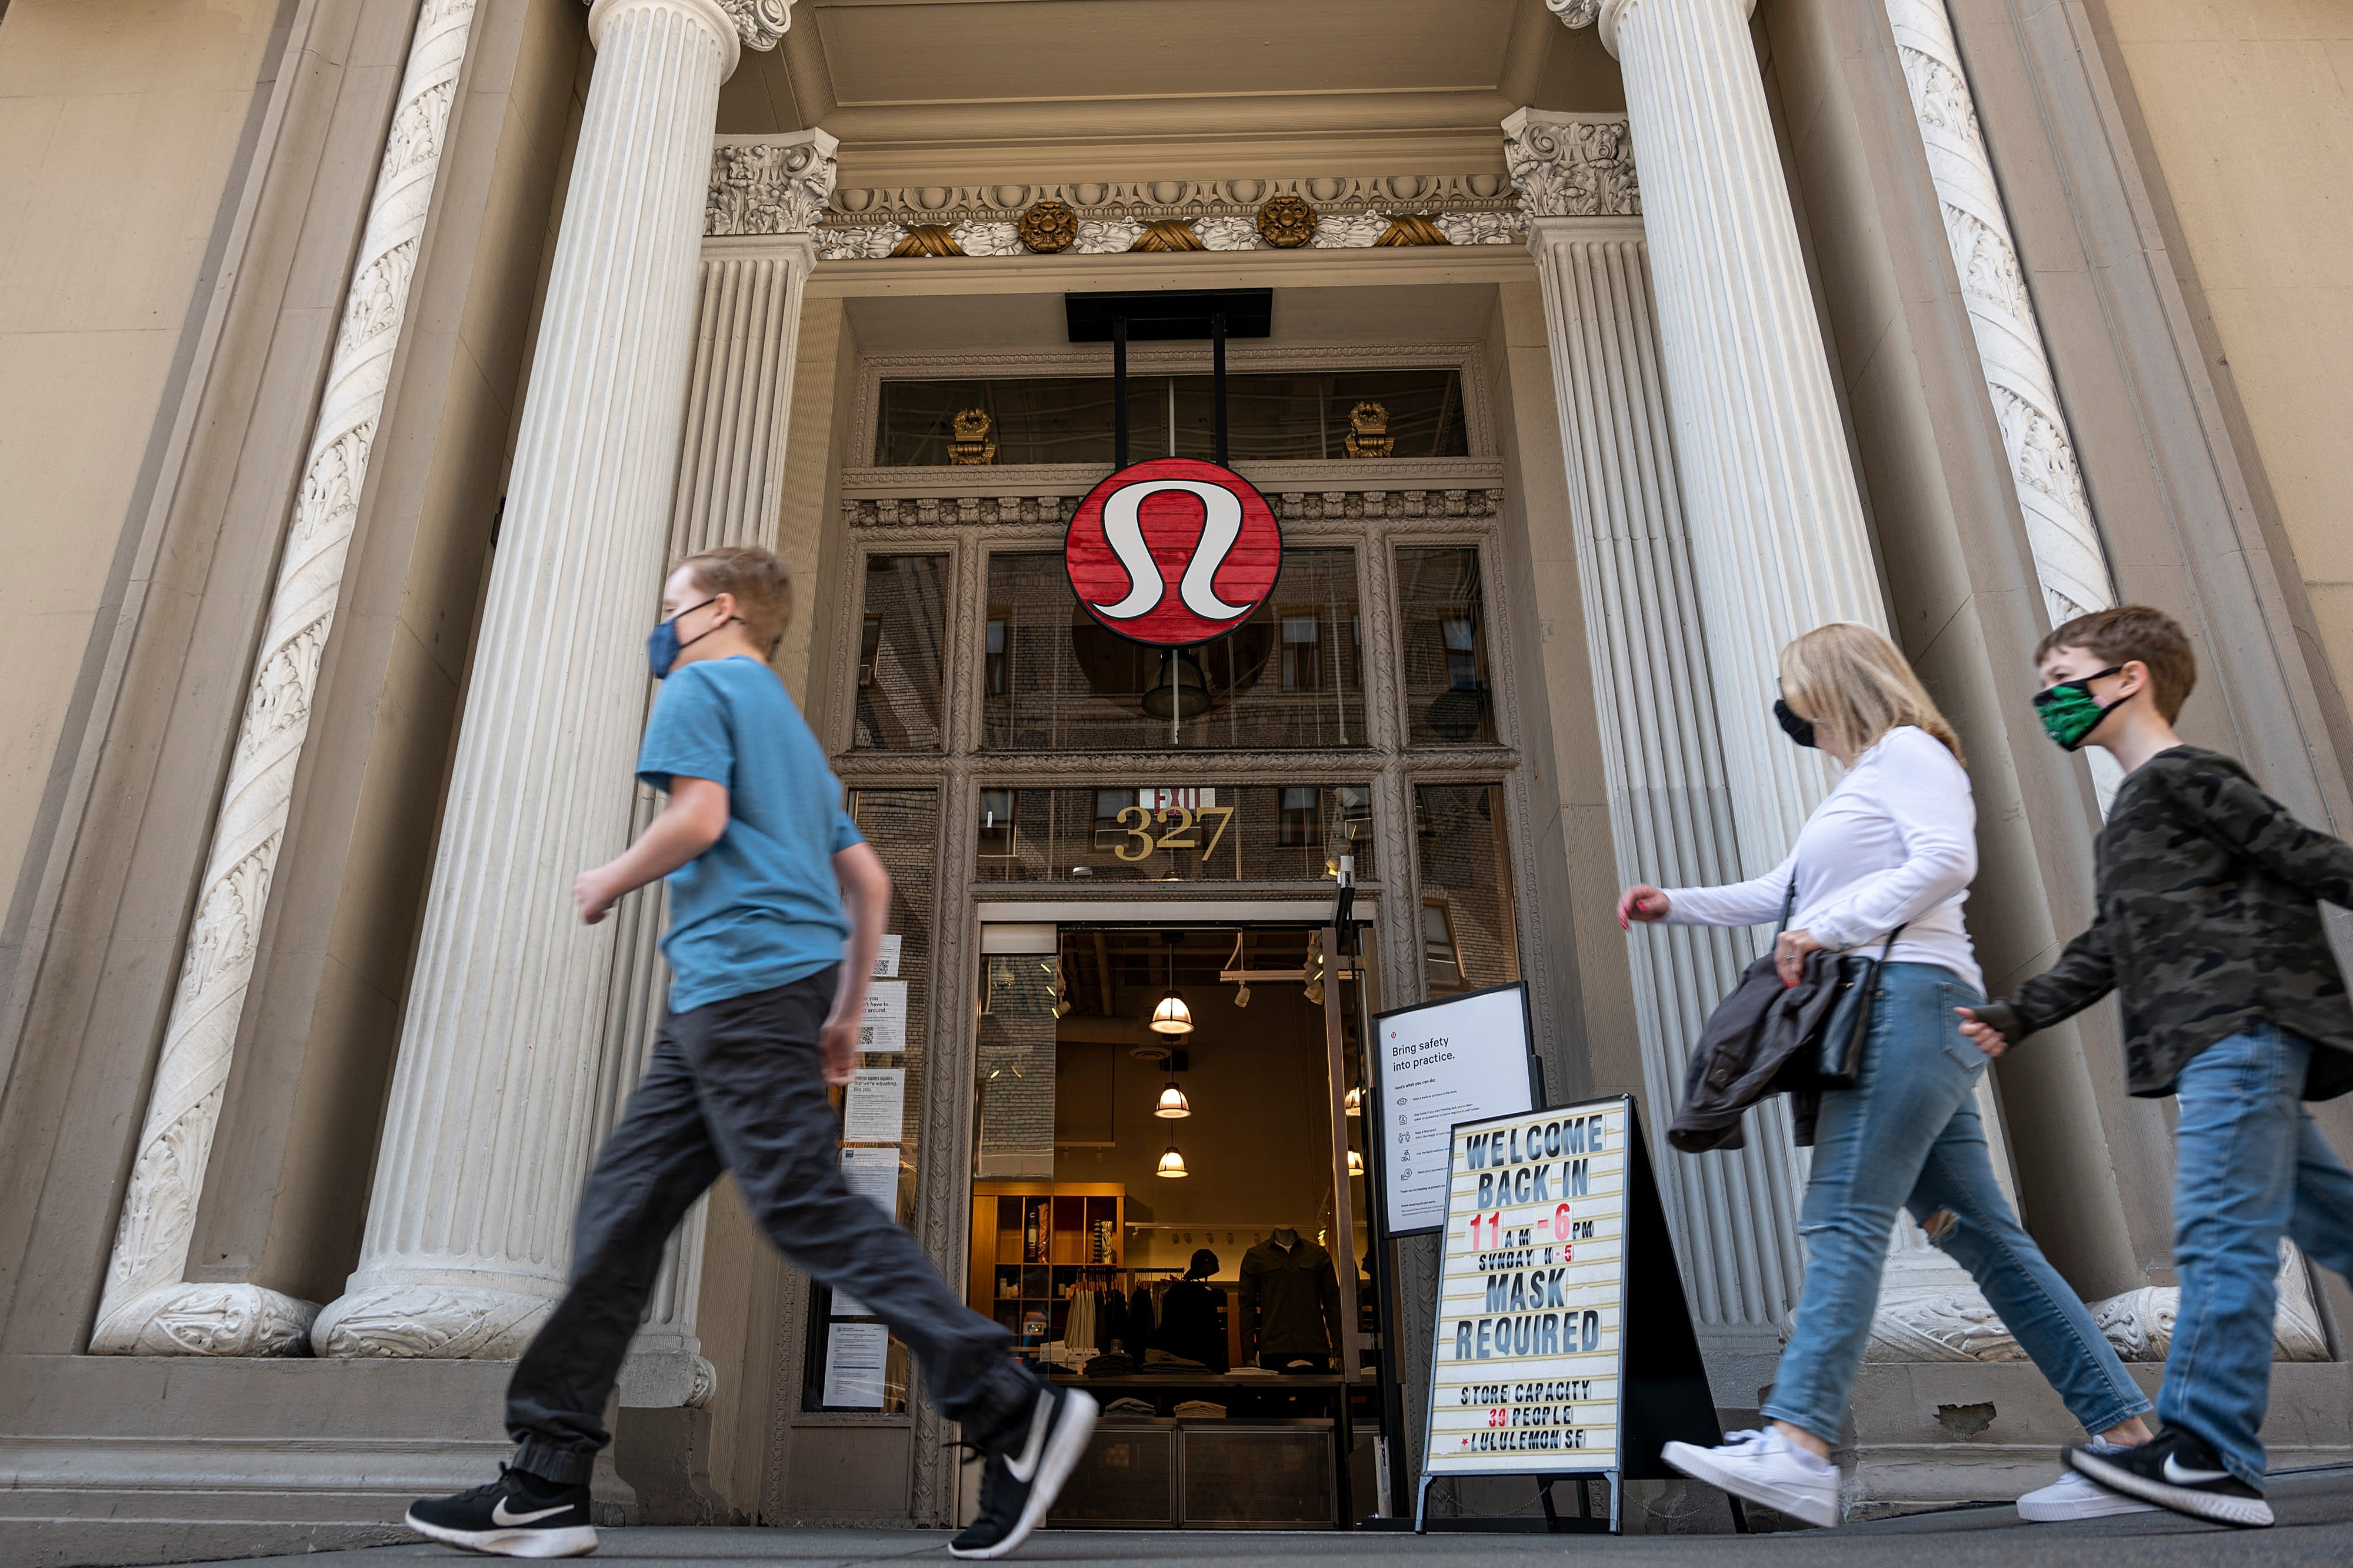 Lululemon first-quarter sales rise 88%, topping estimates, as store traffic rebounds